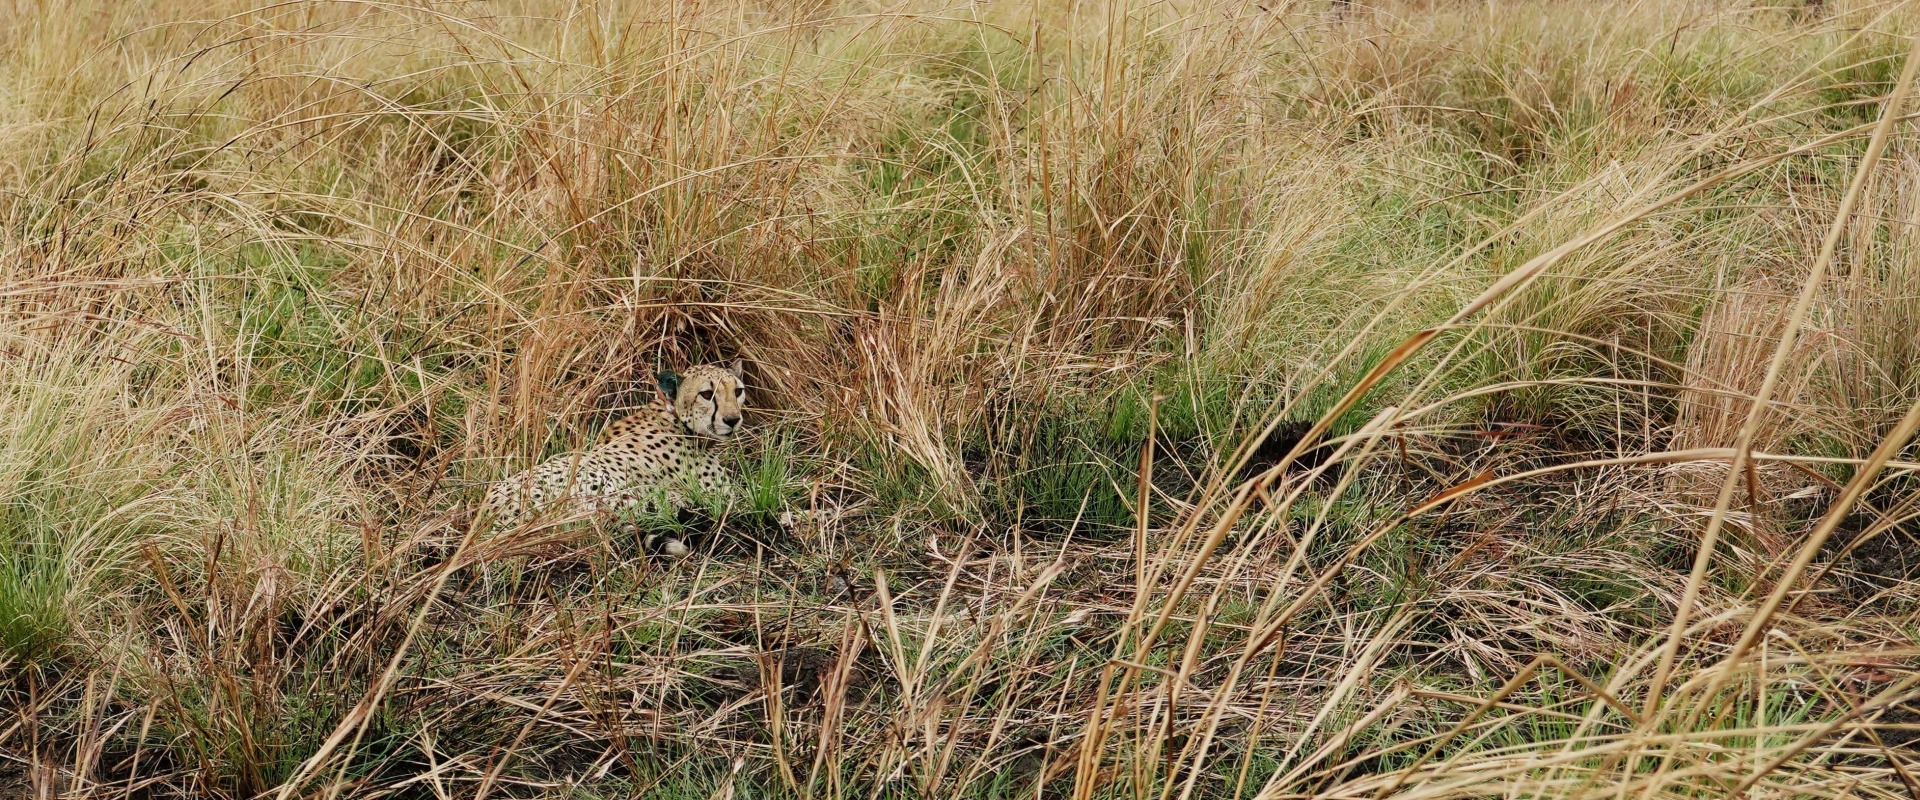 A cheetah lies in the project landscape, courtesy of African Parks/© Marcus Westberg